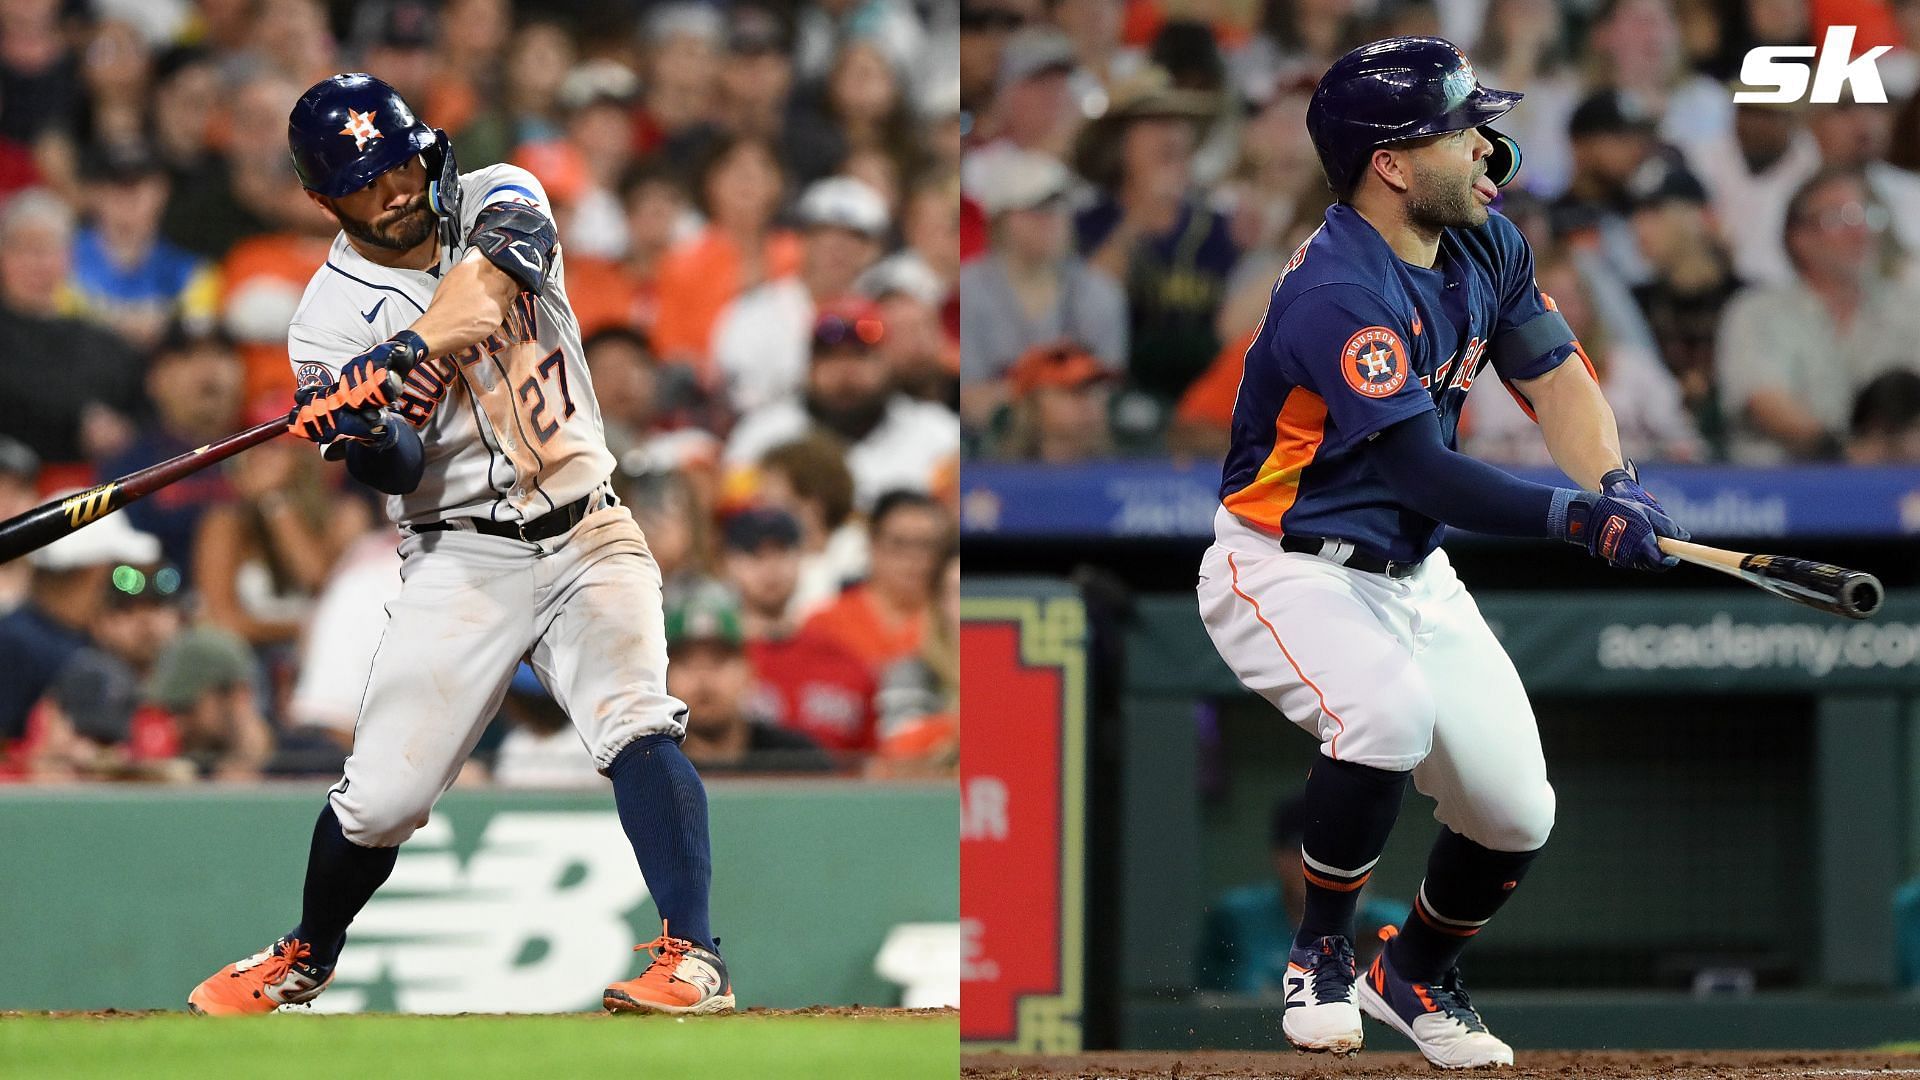 WATCH: Astros star Jose Altuve hits for the first cycle of his